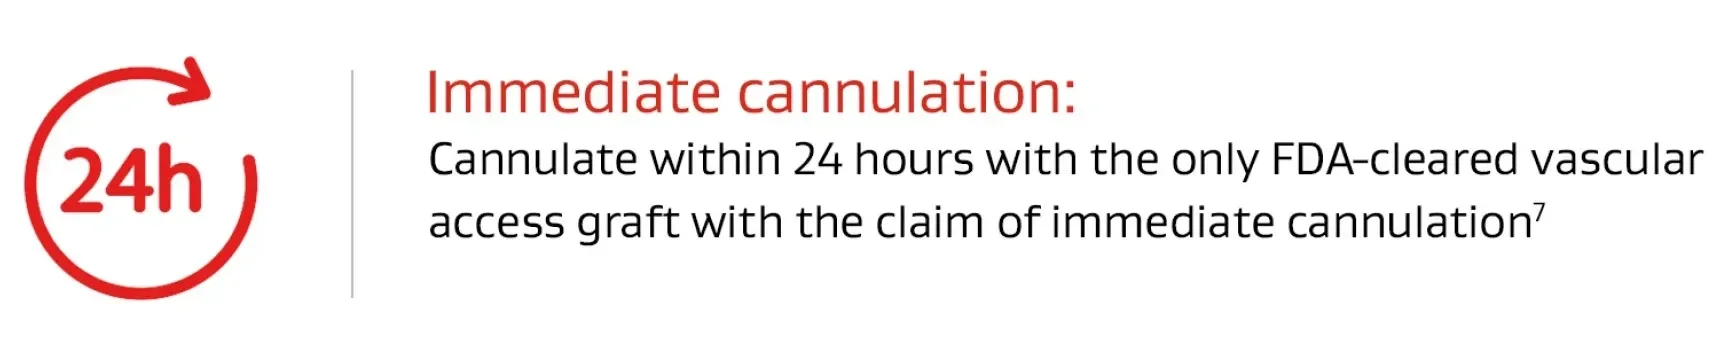 24 hour Immediate Cannulation: Cannulate within 24 hours with the only FDA-cleared vascular access graft with the claim of immediate cannulation